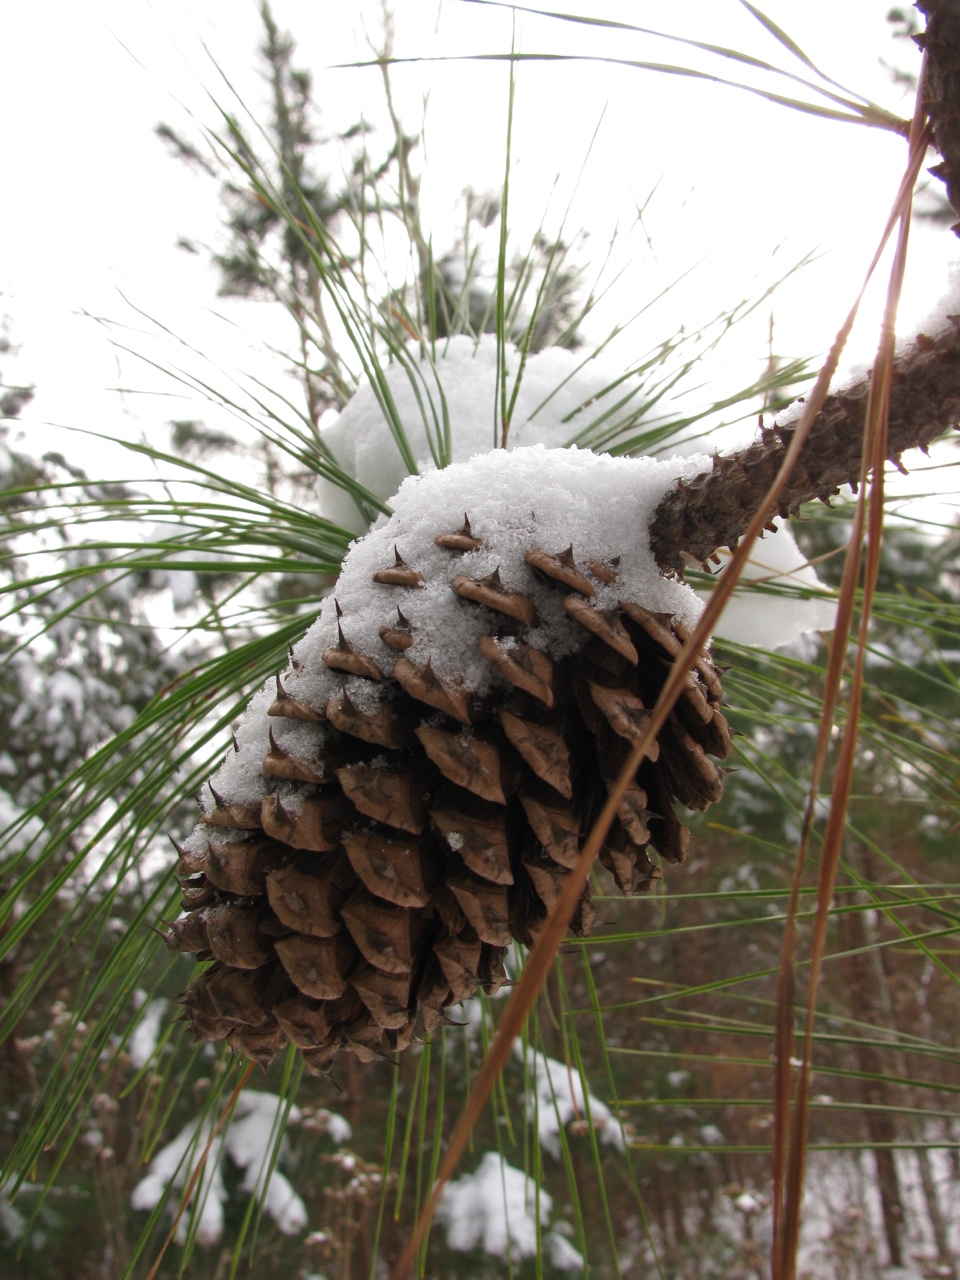 The Scientific Name is Pinus taeda. You will likely hear them called Loblolly Pine, Old Field Pine. This picture shows the Mature seed cone. Notice the sharp prickles on the cone scales of Pinus taeda